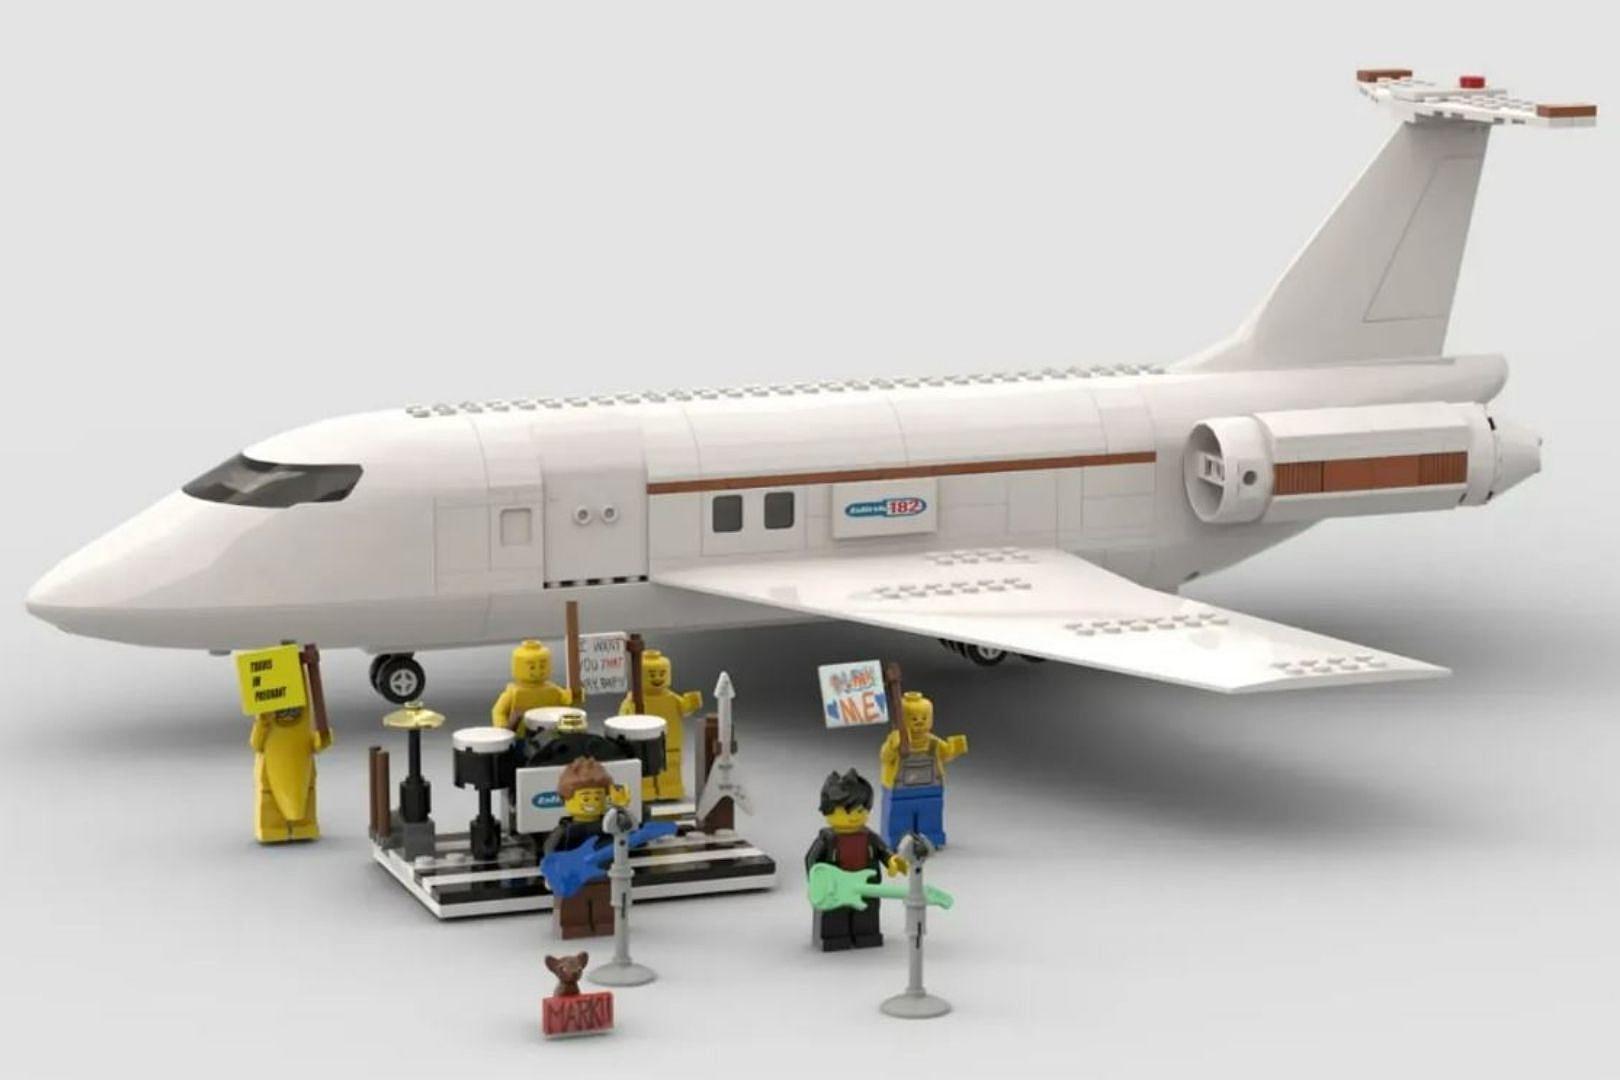 blink-182 Fan Makes LEGO Replica of 'All The Small Things' Video